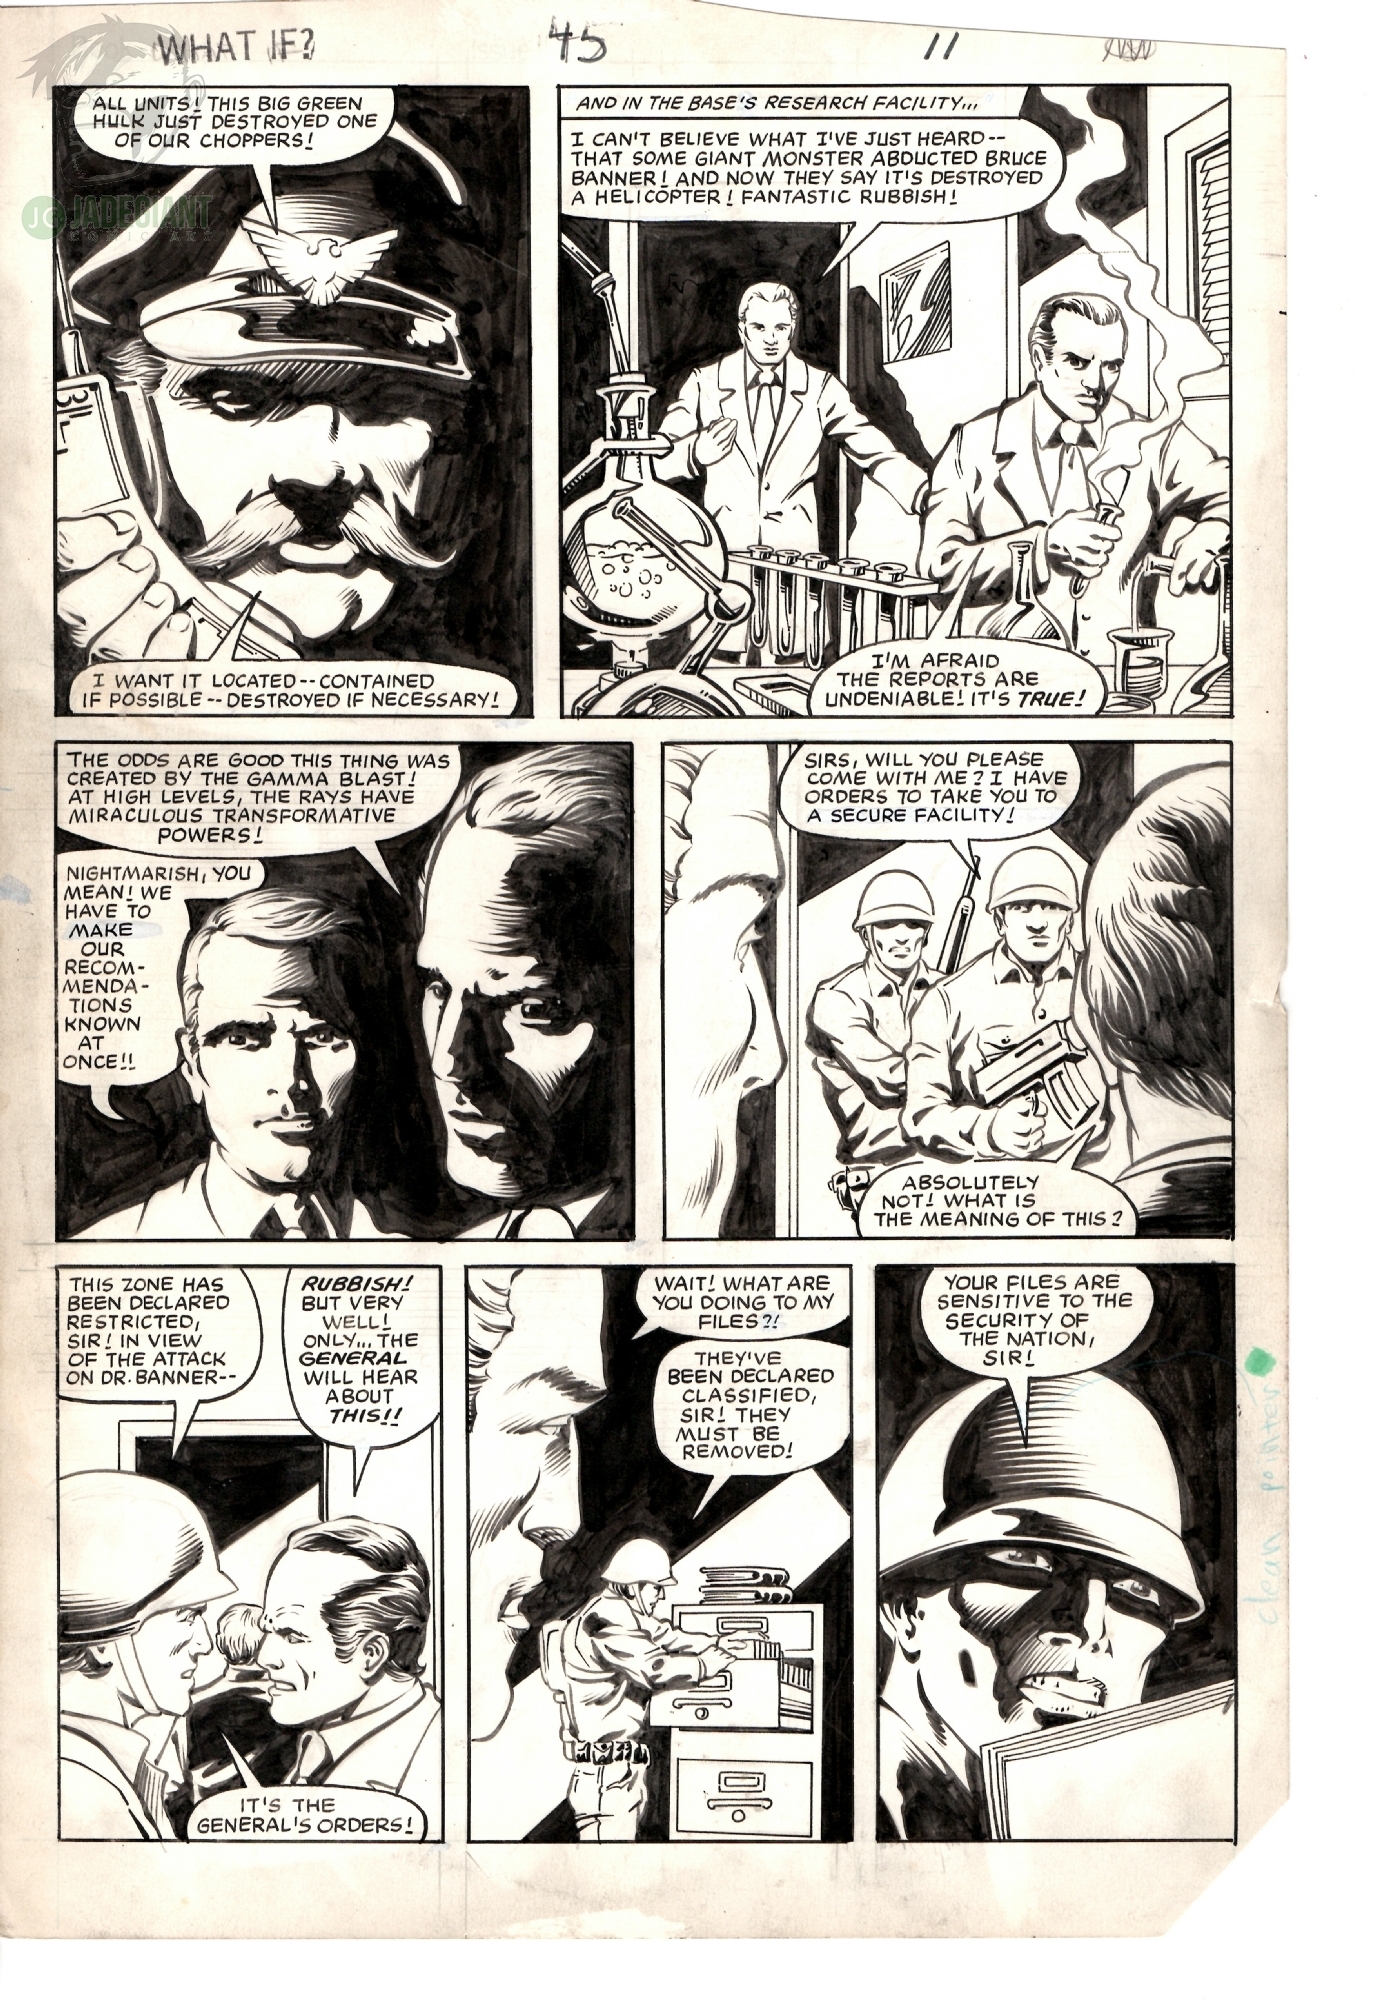 1984 What if The Hulk Went -- -- Berserk? Volume 1, Issue 45 page 11 by Ron Wilson Comic Art